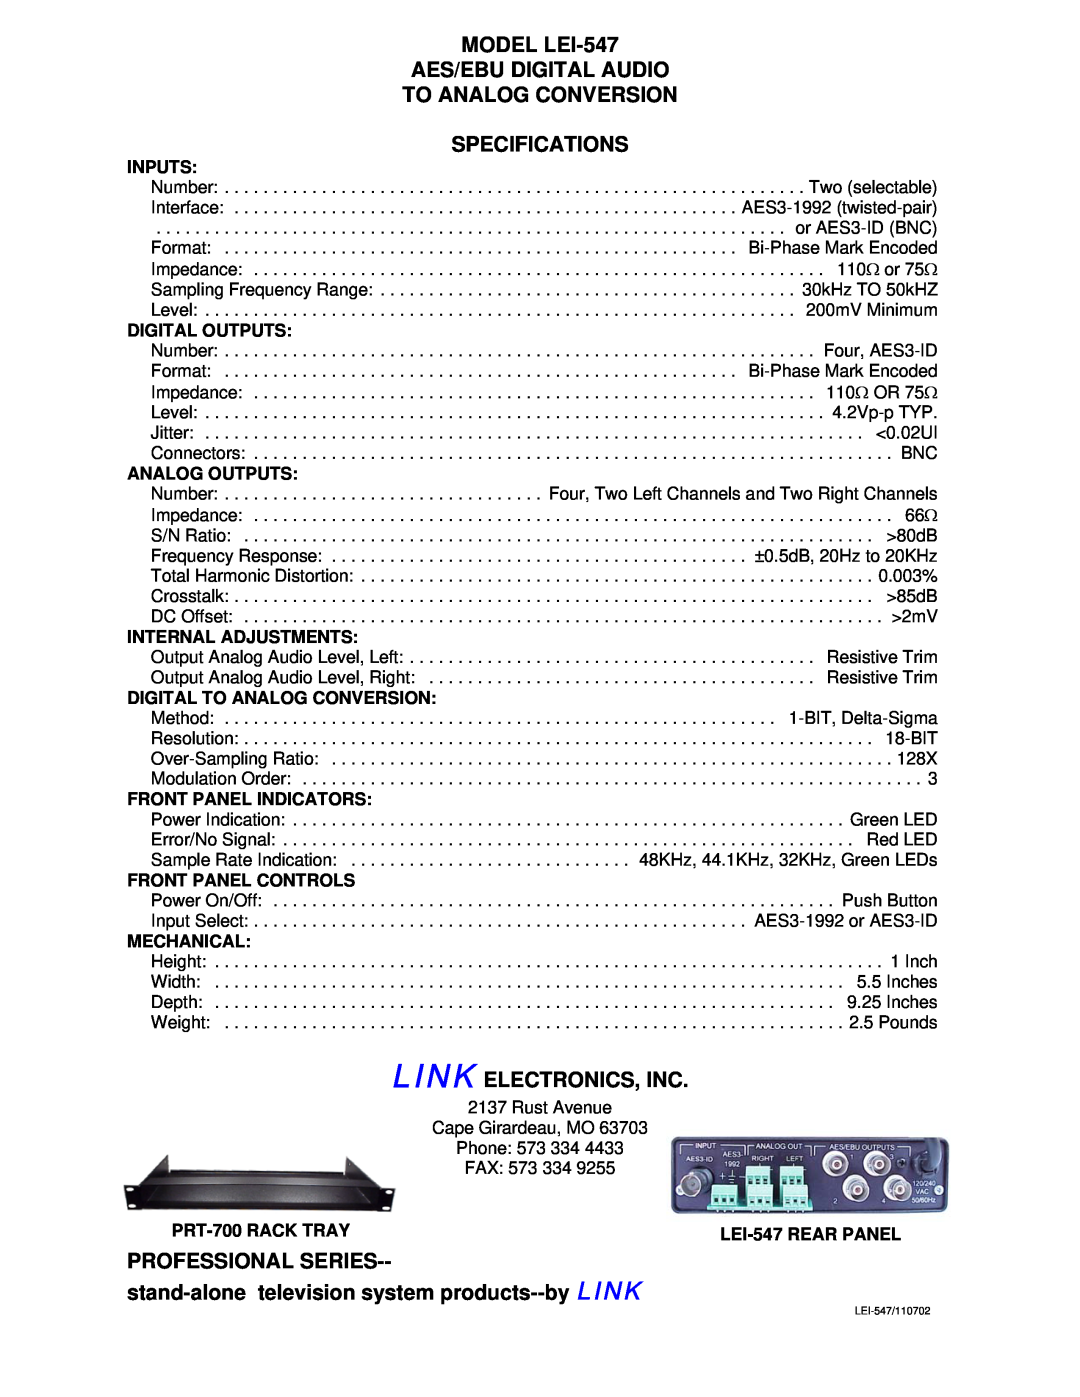 Link electronic MODEL LEI-547 AES/EBU DIGITAL AUDIO TO ANALOG CONVERSION, Specifications, Link Electronics, Inc 